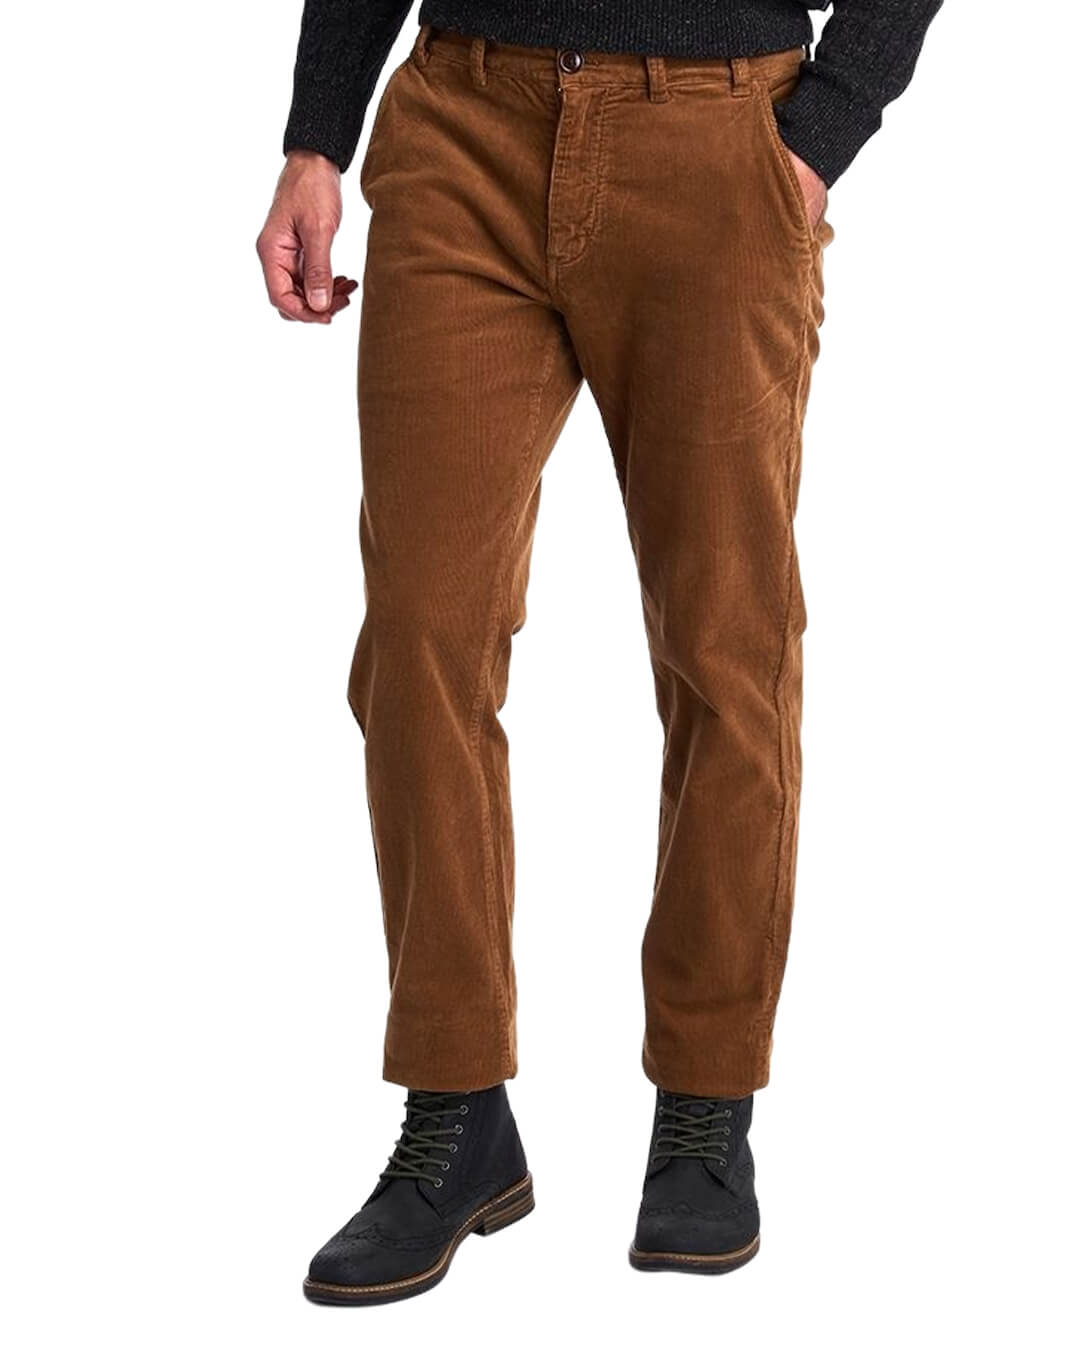 Barbour Trousers Barbour Neuston Brown Stretch Cord Trousers